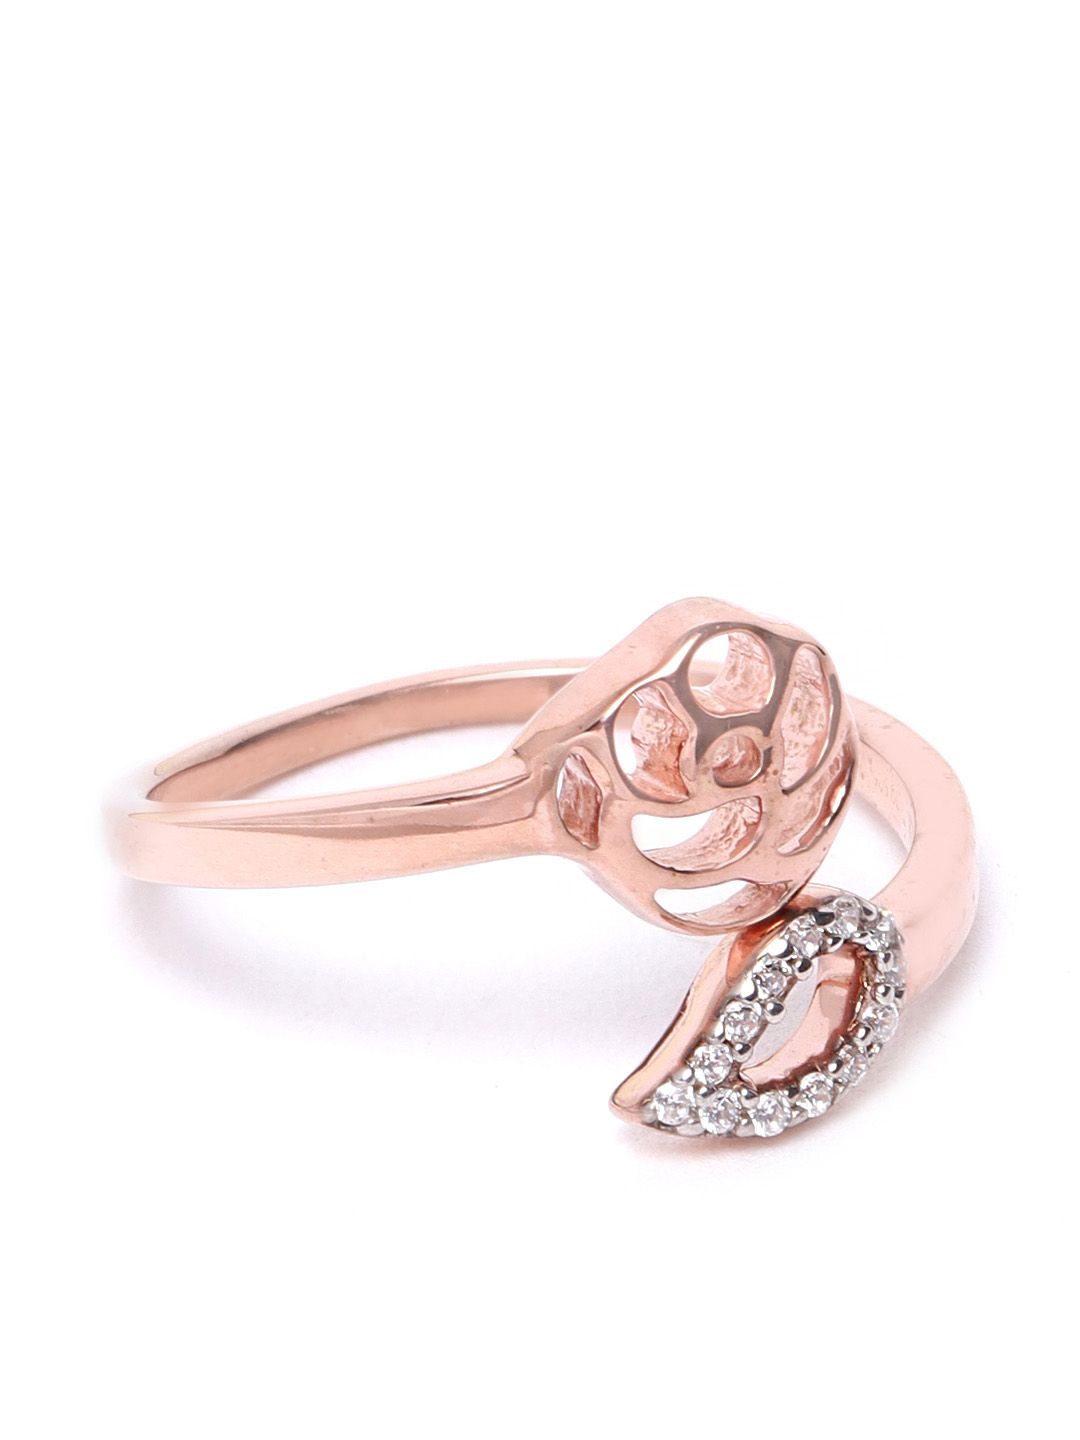 Silgo Women 925 Sterling Silver Rose Gold-Plated CZ Studded Adjustable Finger Ring Price in India